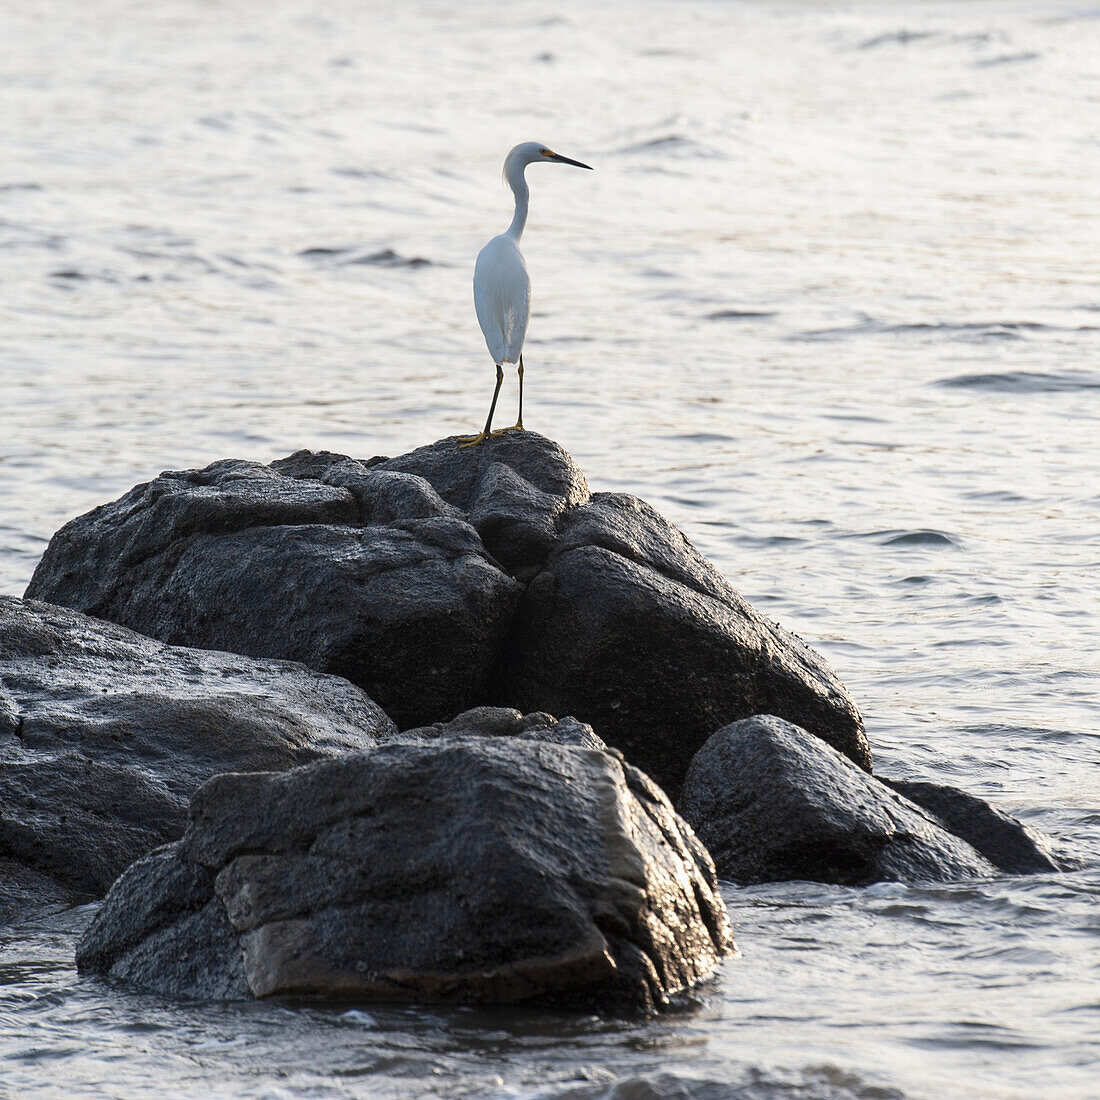 'A Bird Stands On A Rock Surrounded By Water; Sayulita, Mexico'